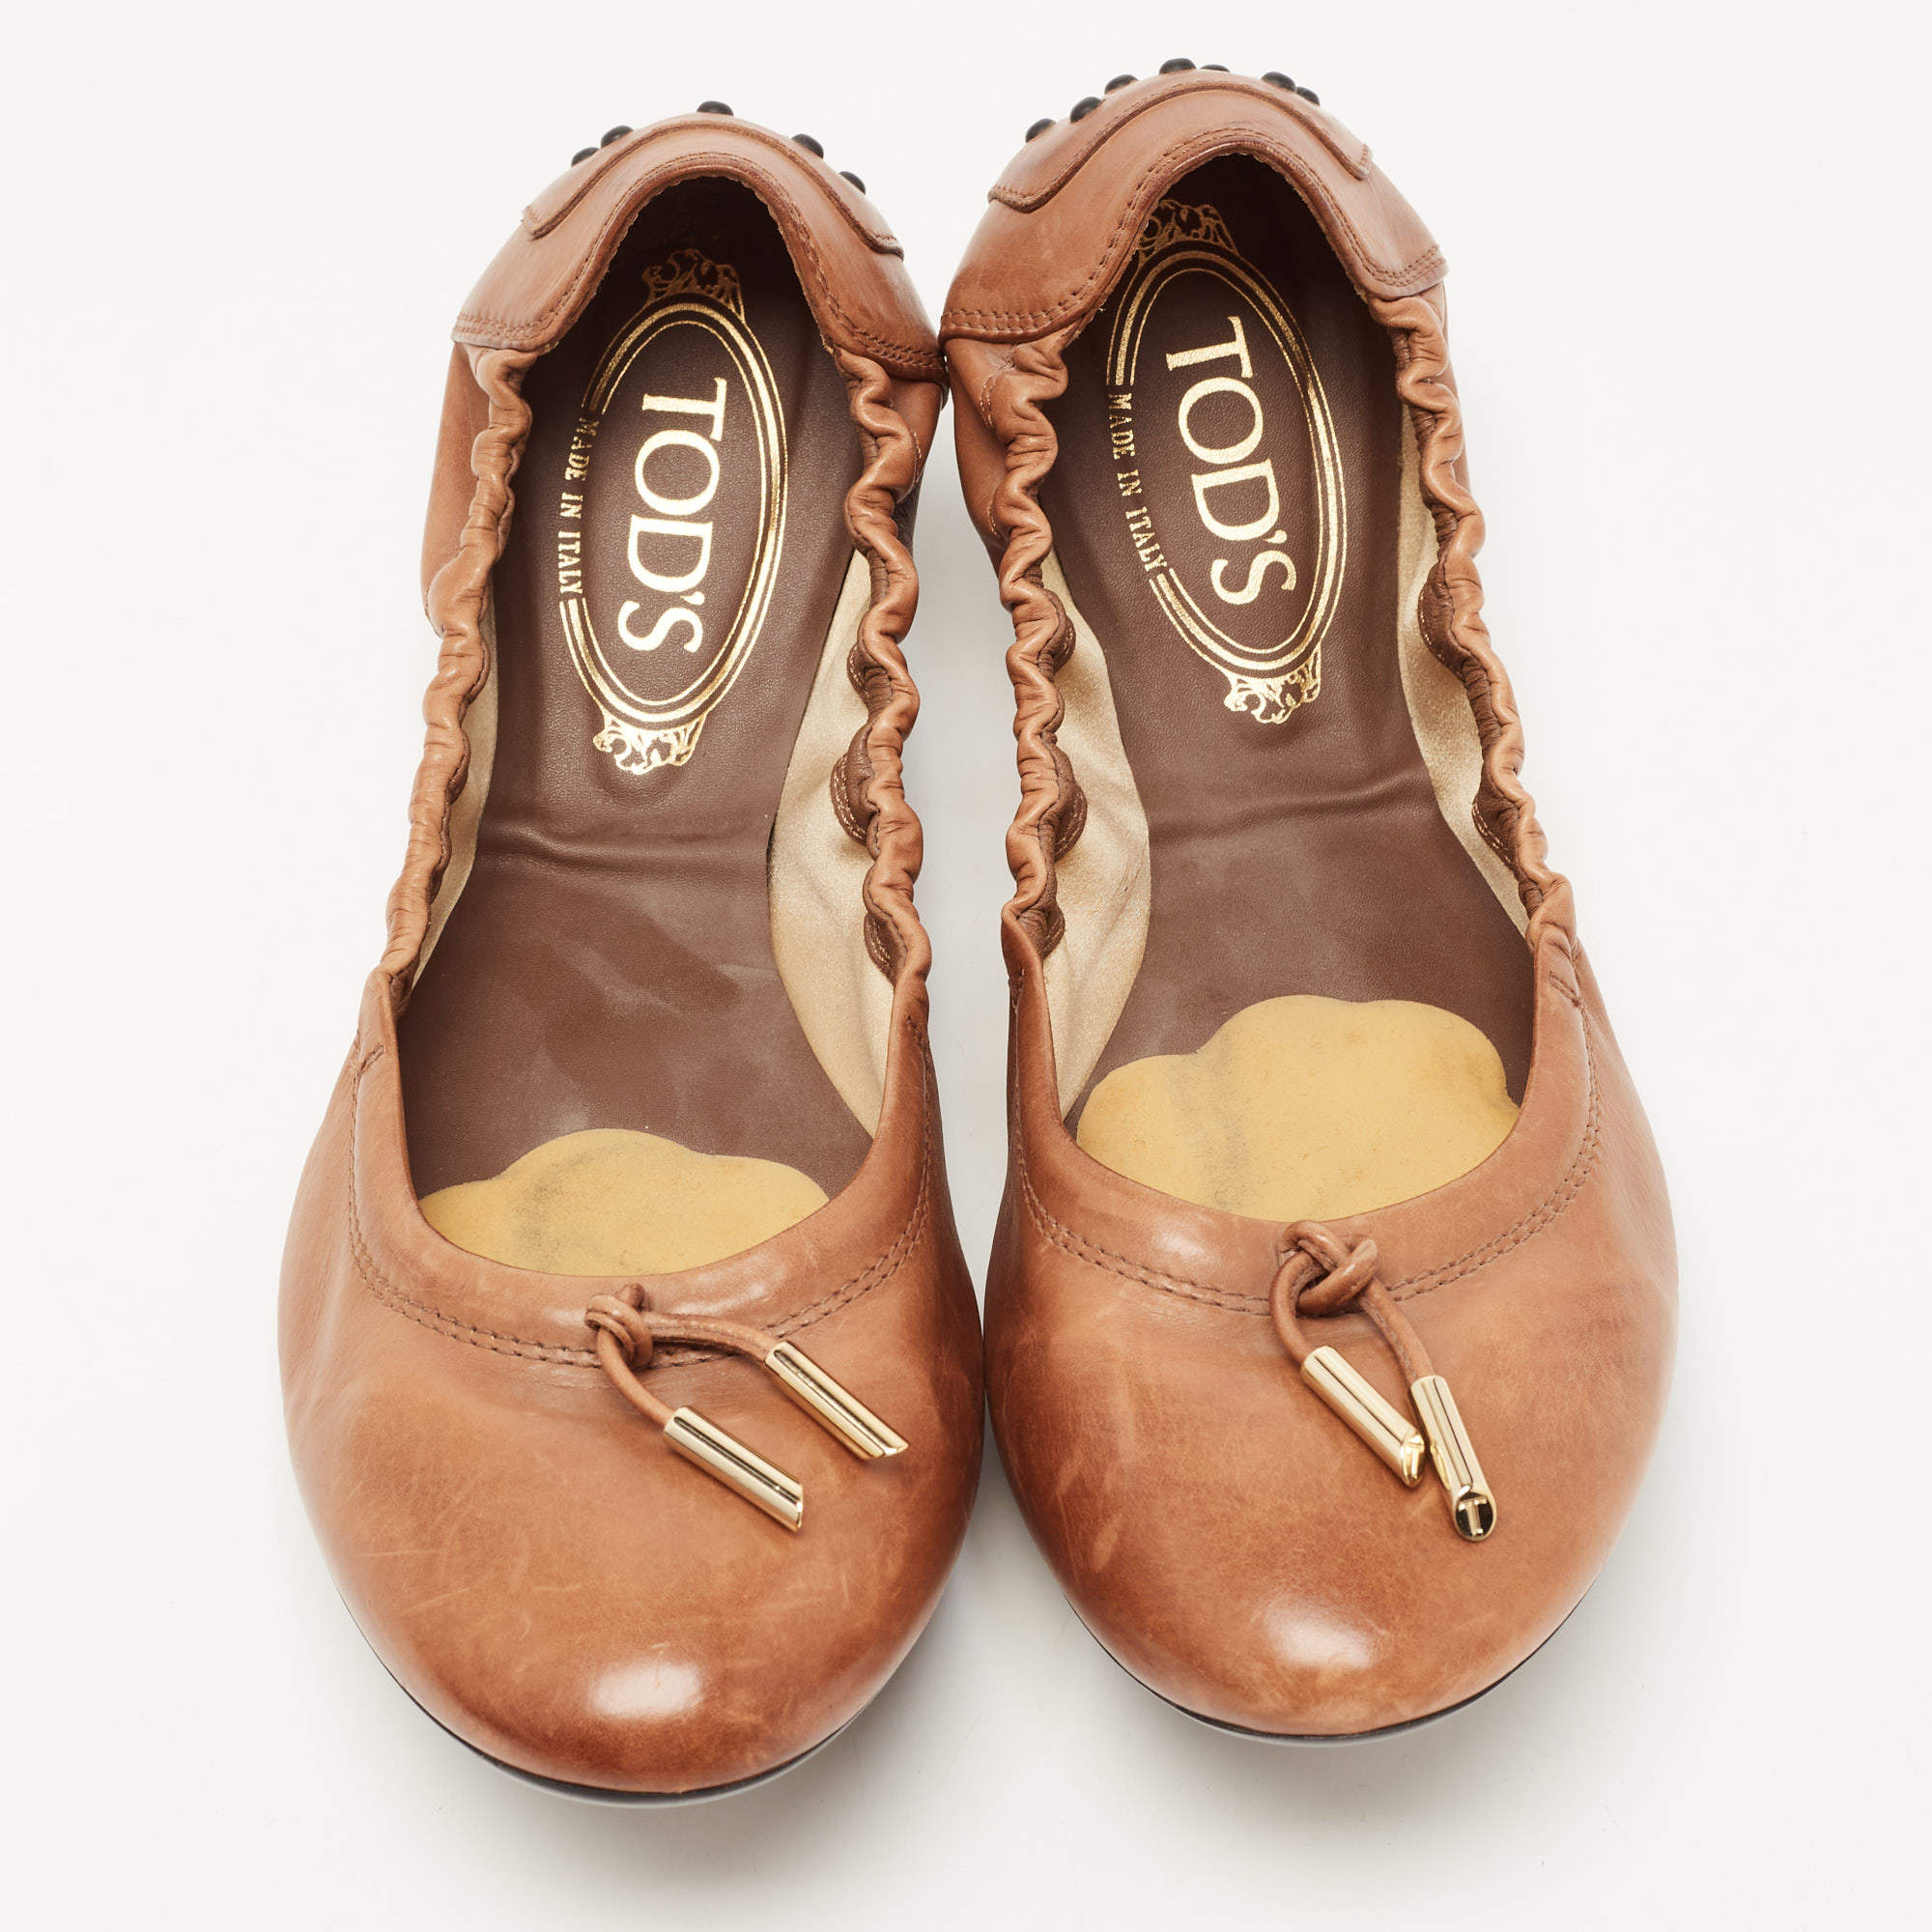 Salter House Makes Ballet Flats for the Bow Obsessed - The New